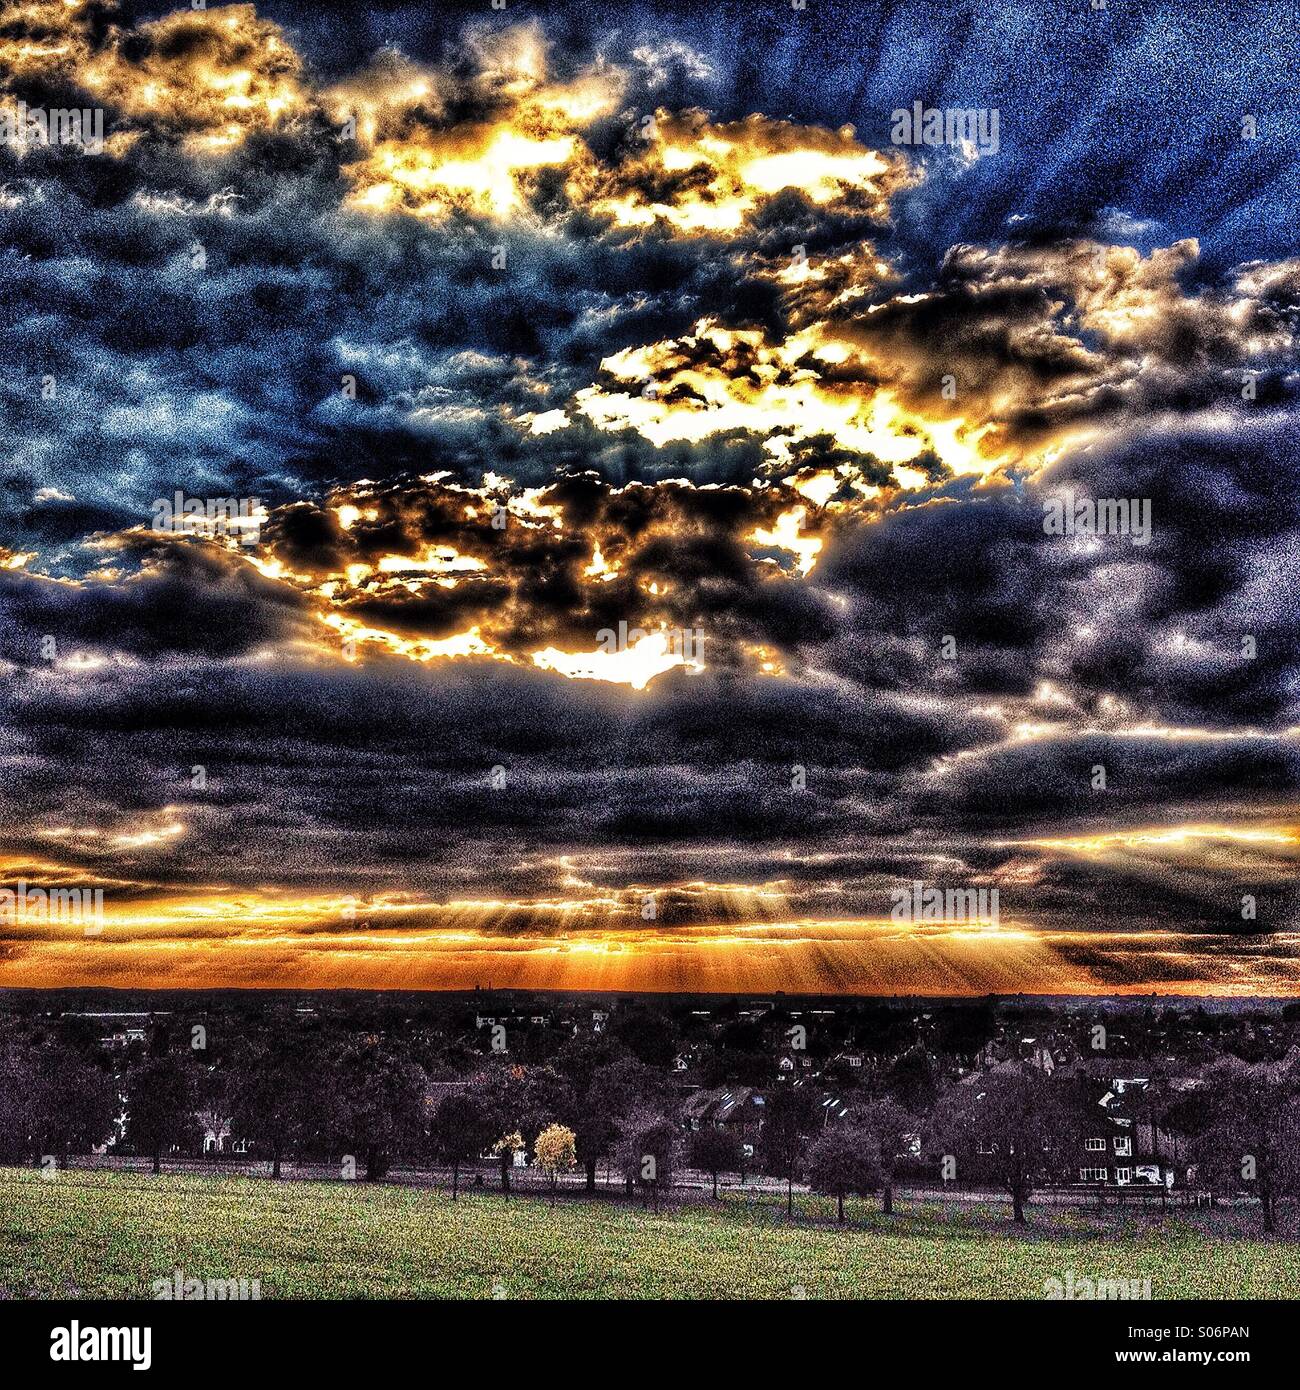 Urban sunsets over South West london as seen from park Stock Photo